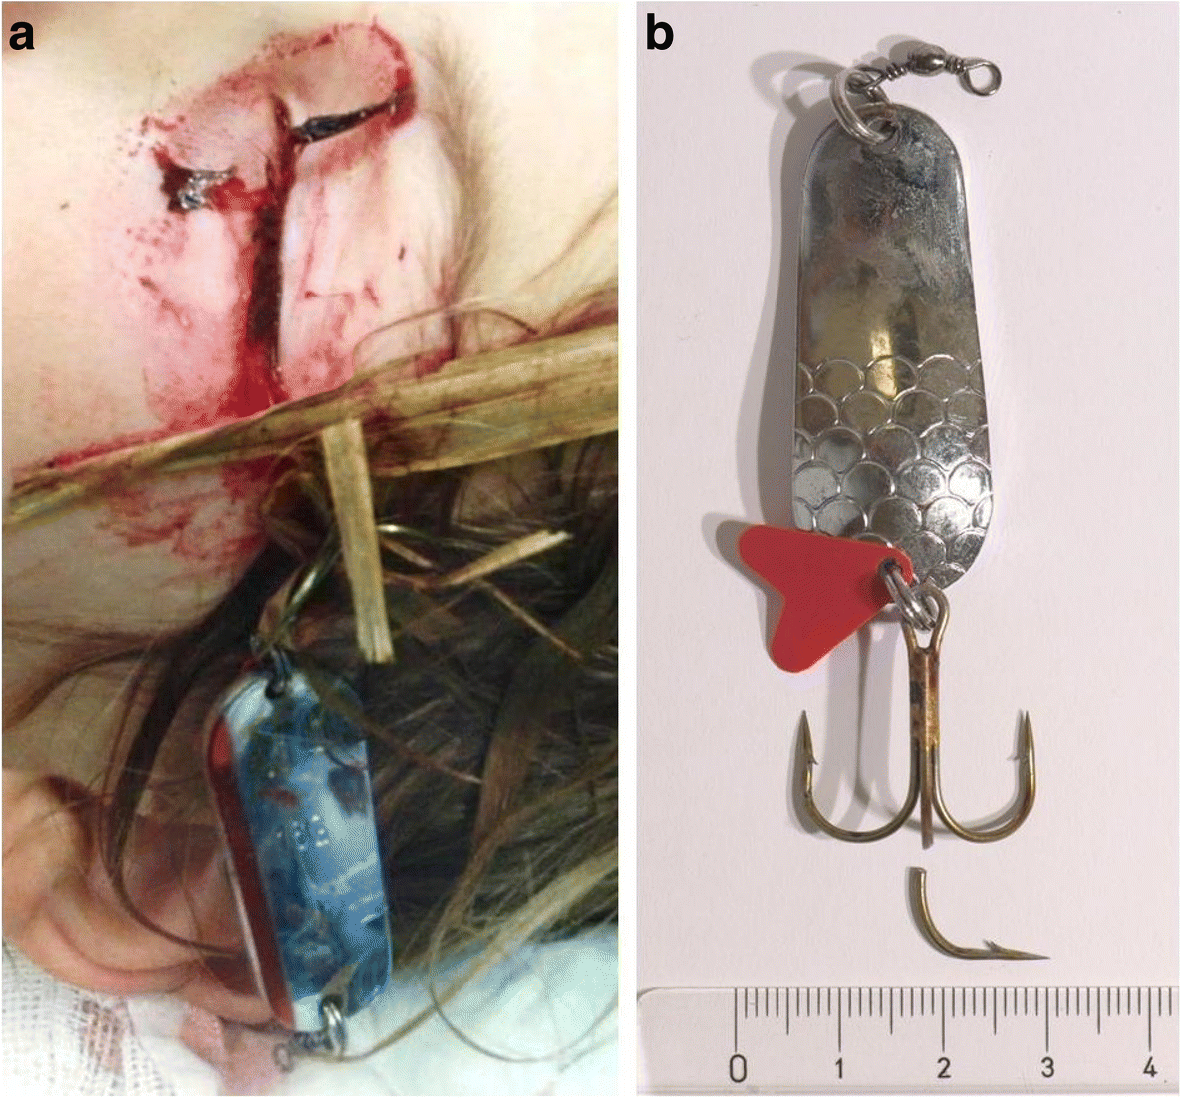 Open globe and penetrating eyelid injuries from fish hooks, BMC  Ophthalmology